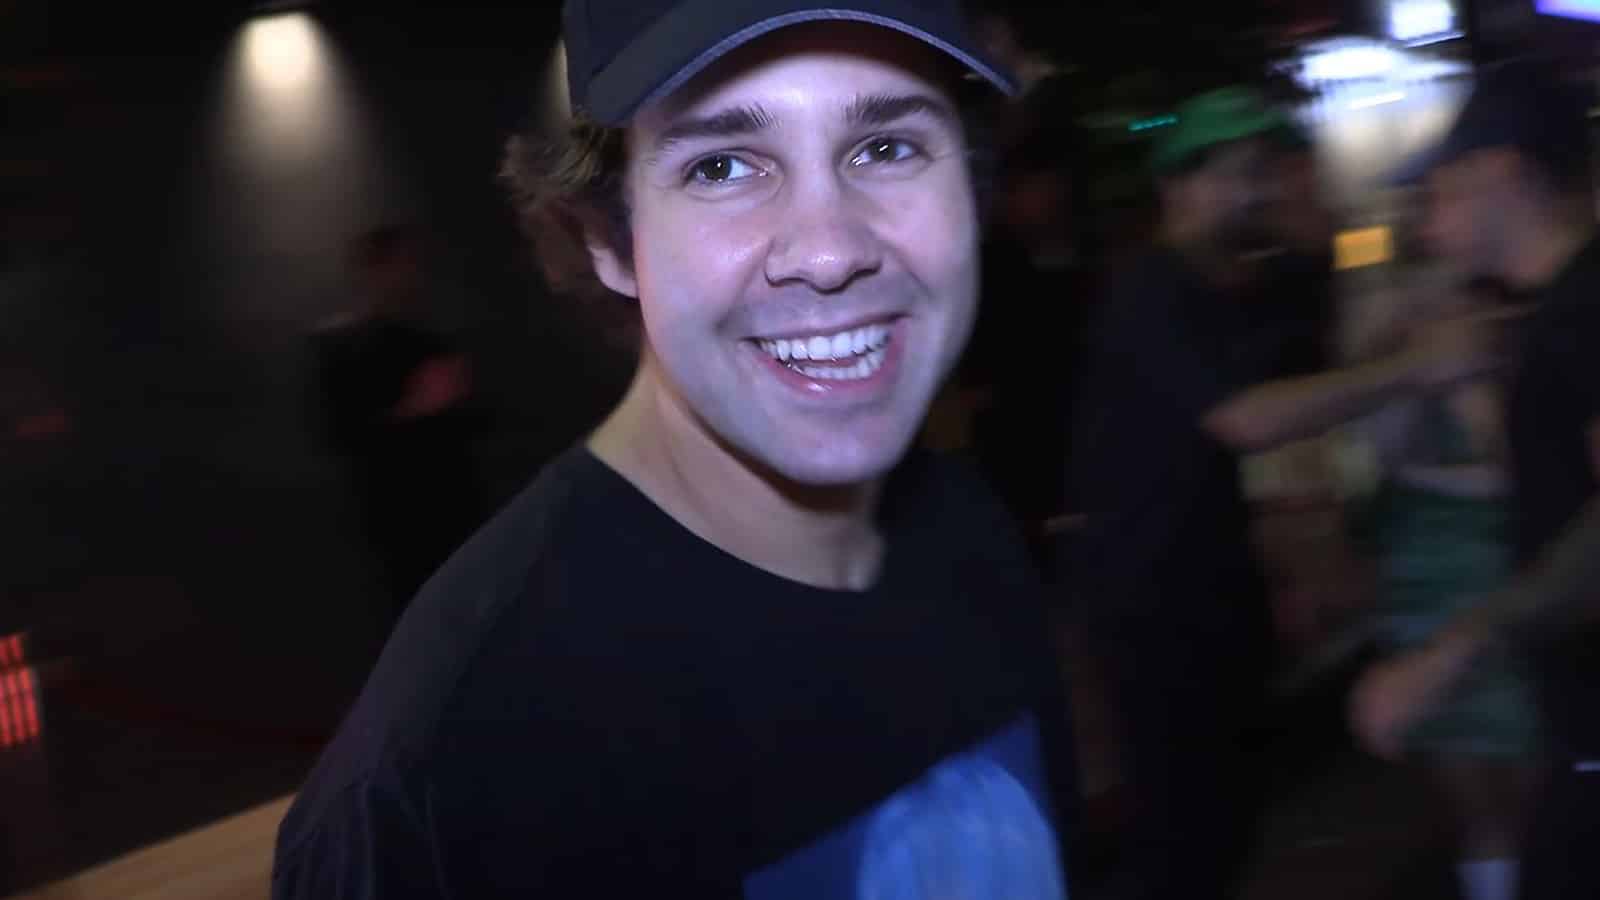 David dobrik excited about being stuck in Europe